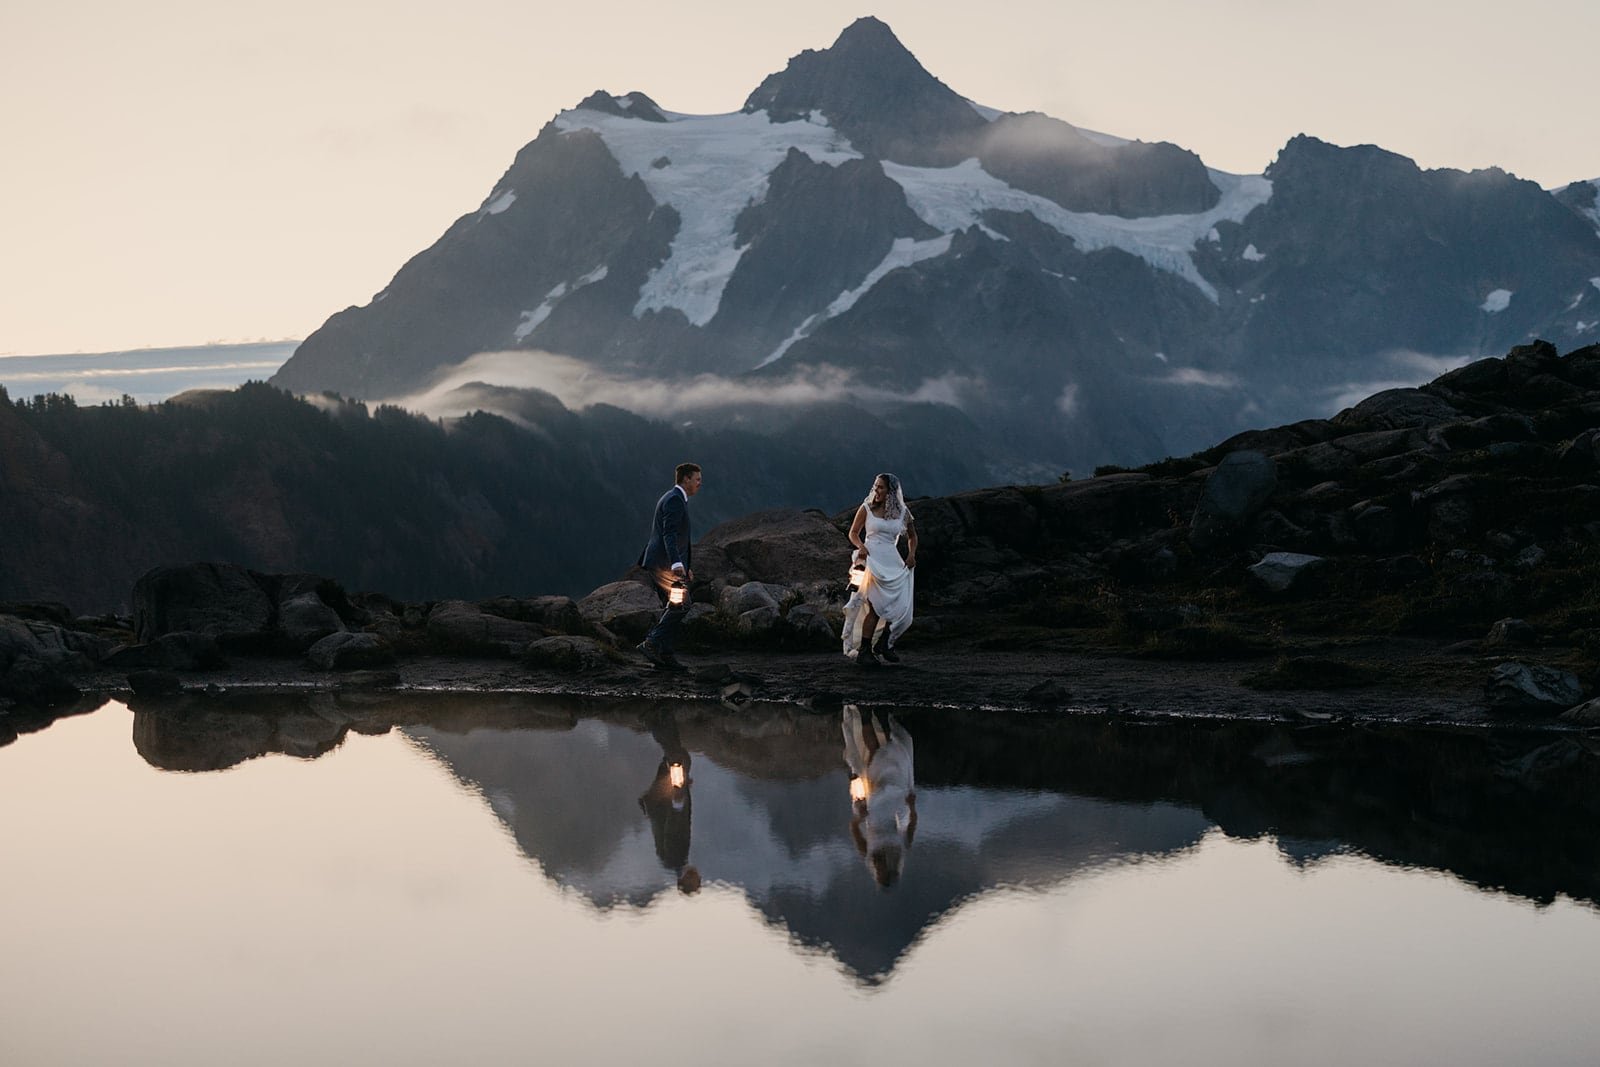 The couple walks around the mountains at sunrise.